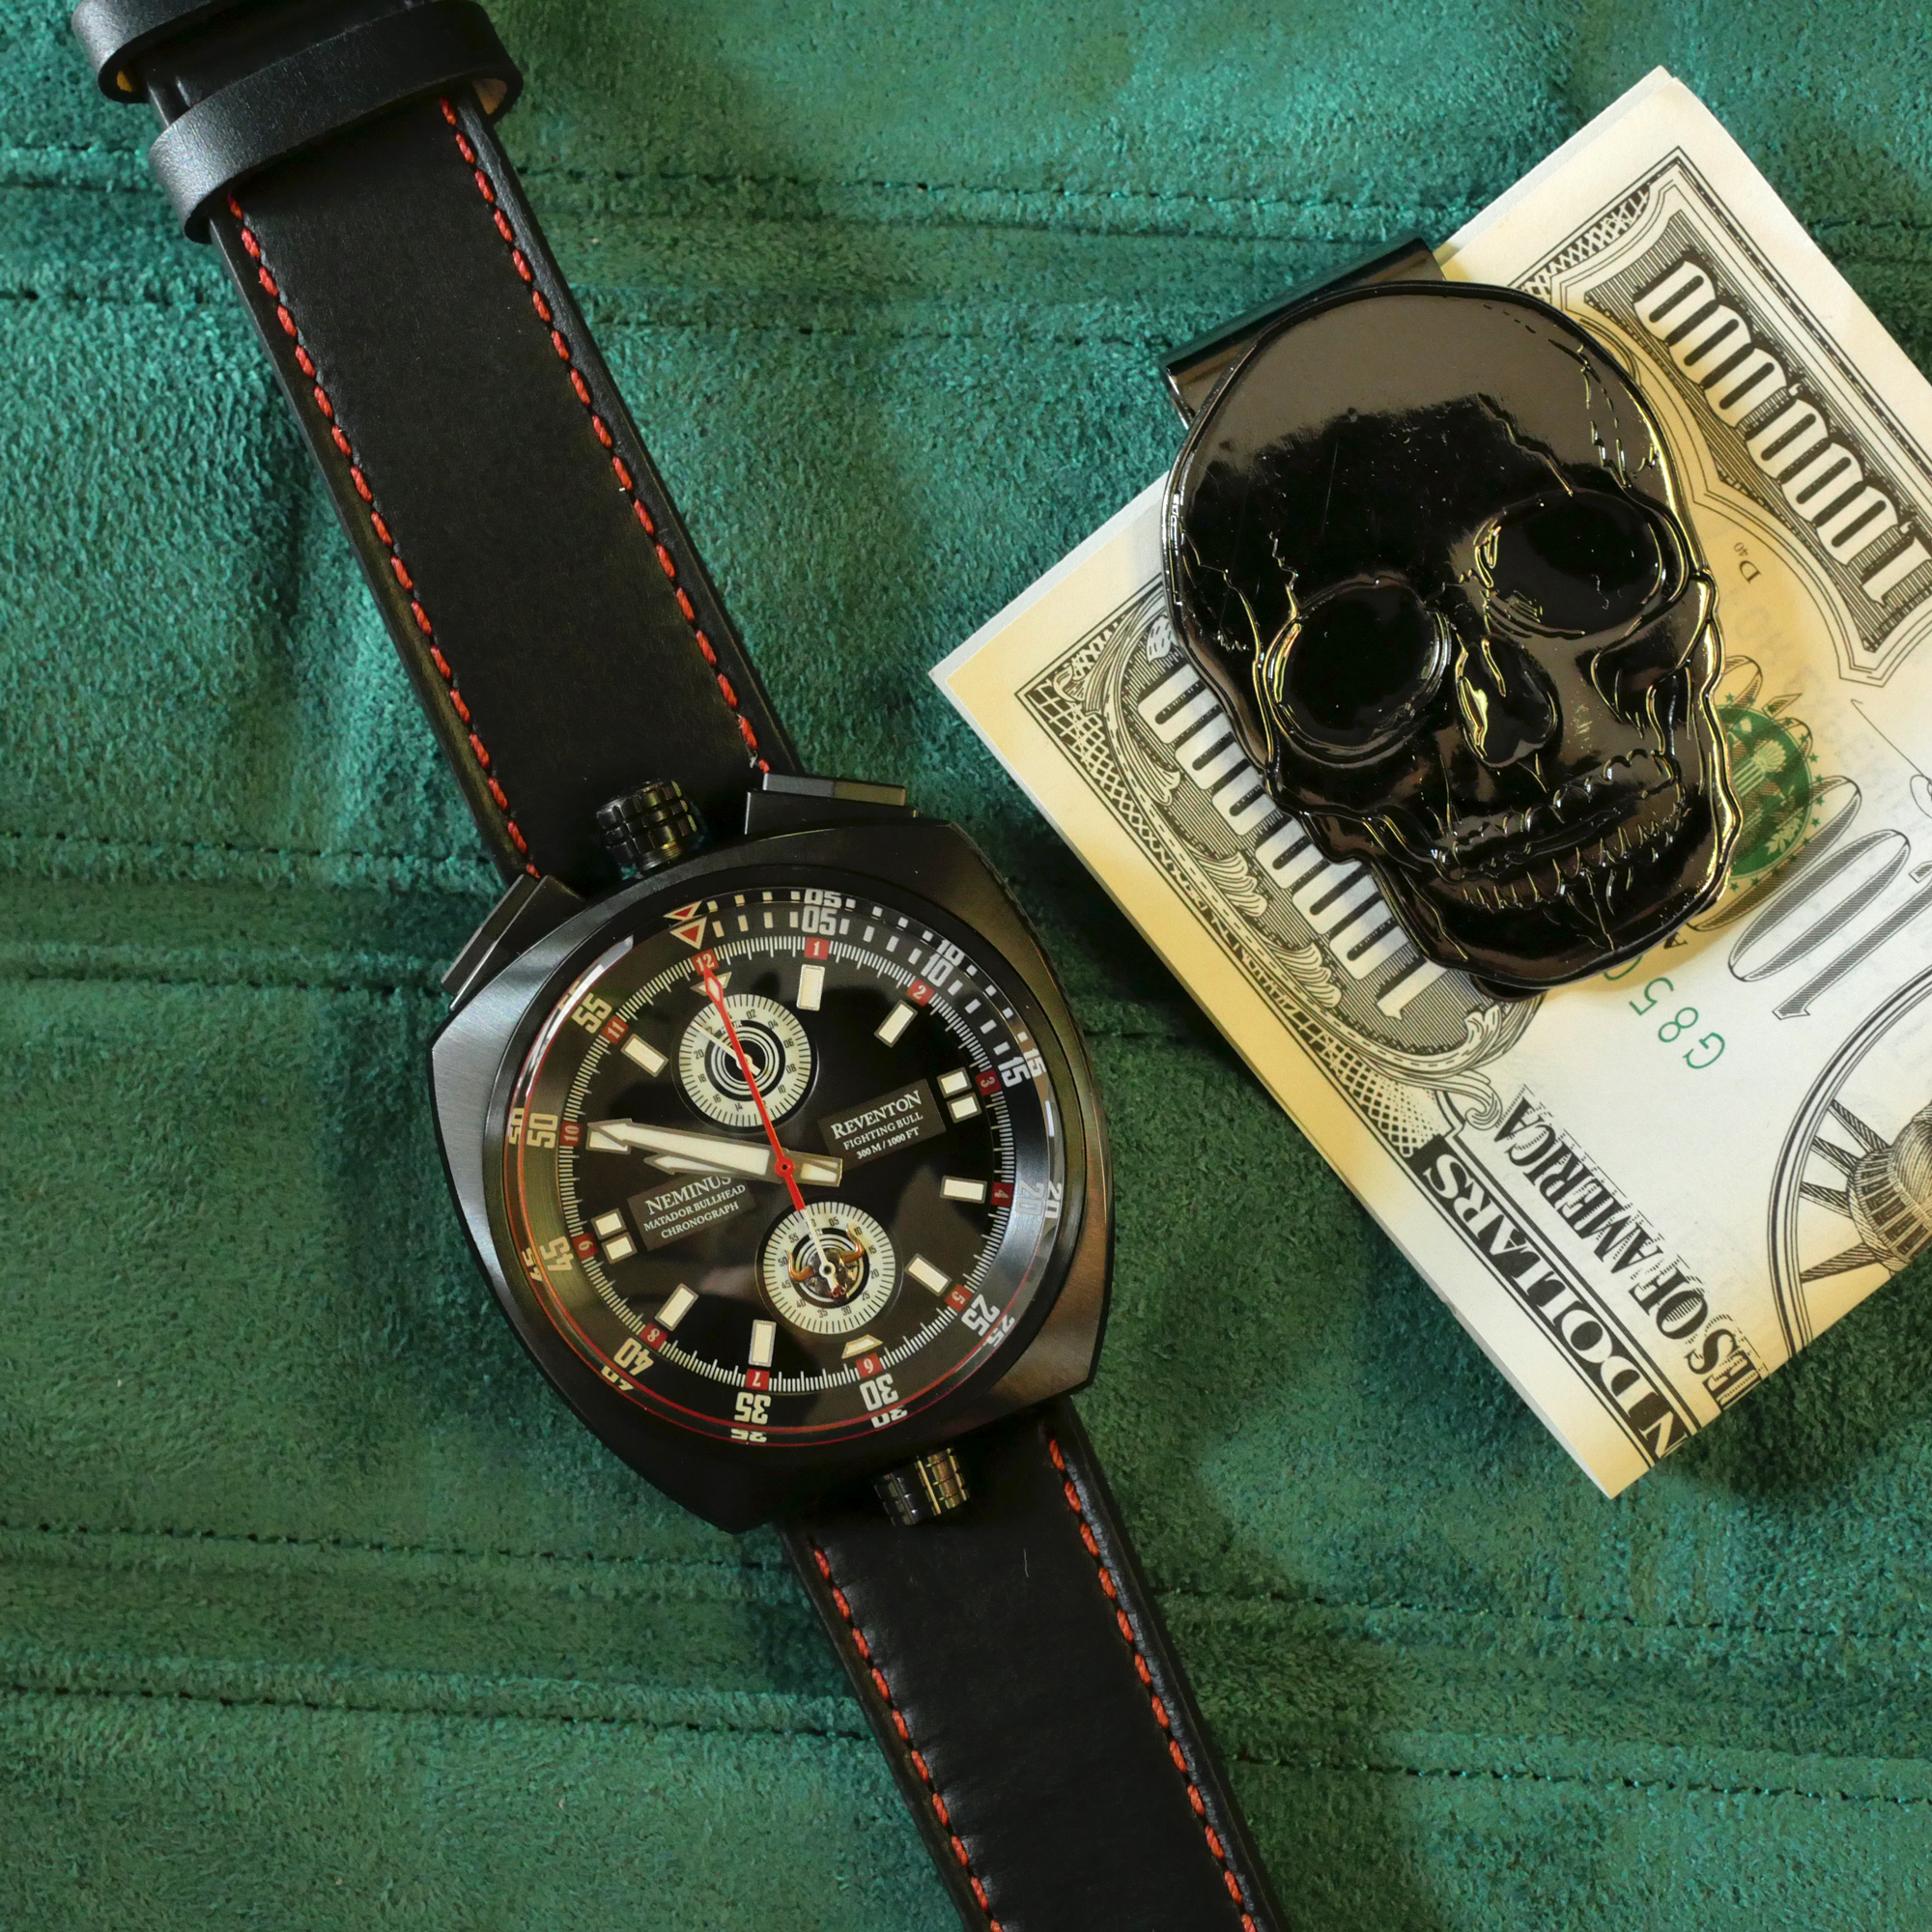 SWEEPHAND: Want An Original Citizen Bullhead? – A Quick Buying Guide |  Chronograph, Pocket watch antique, Watches for men